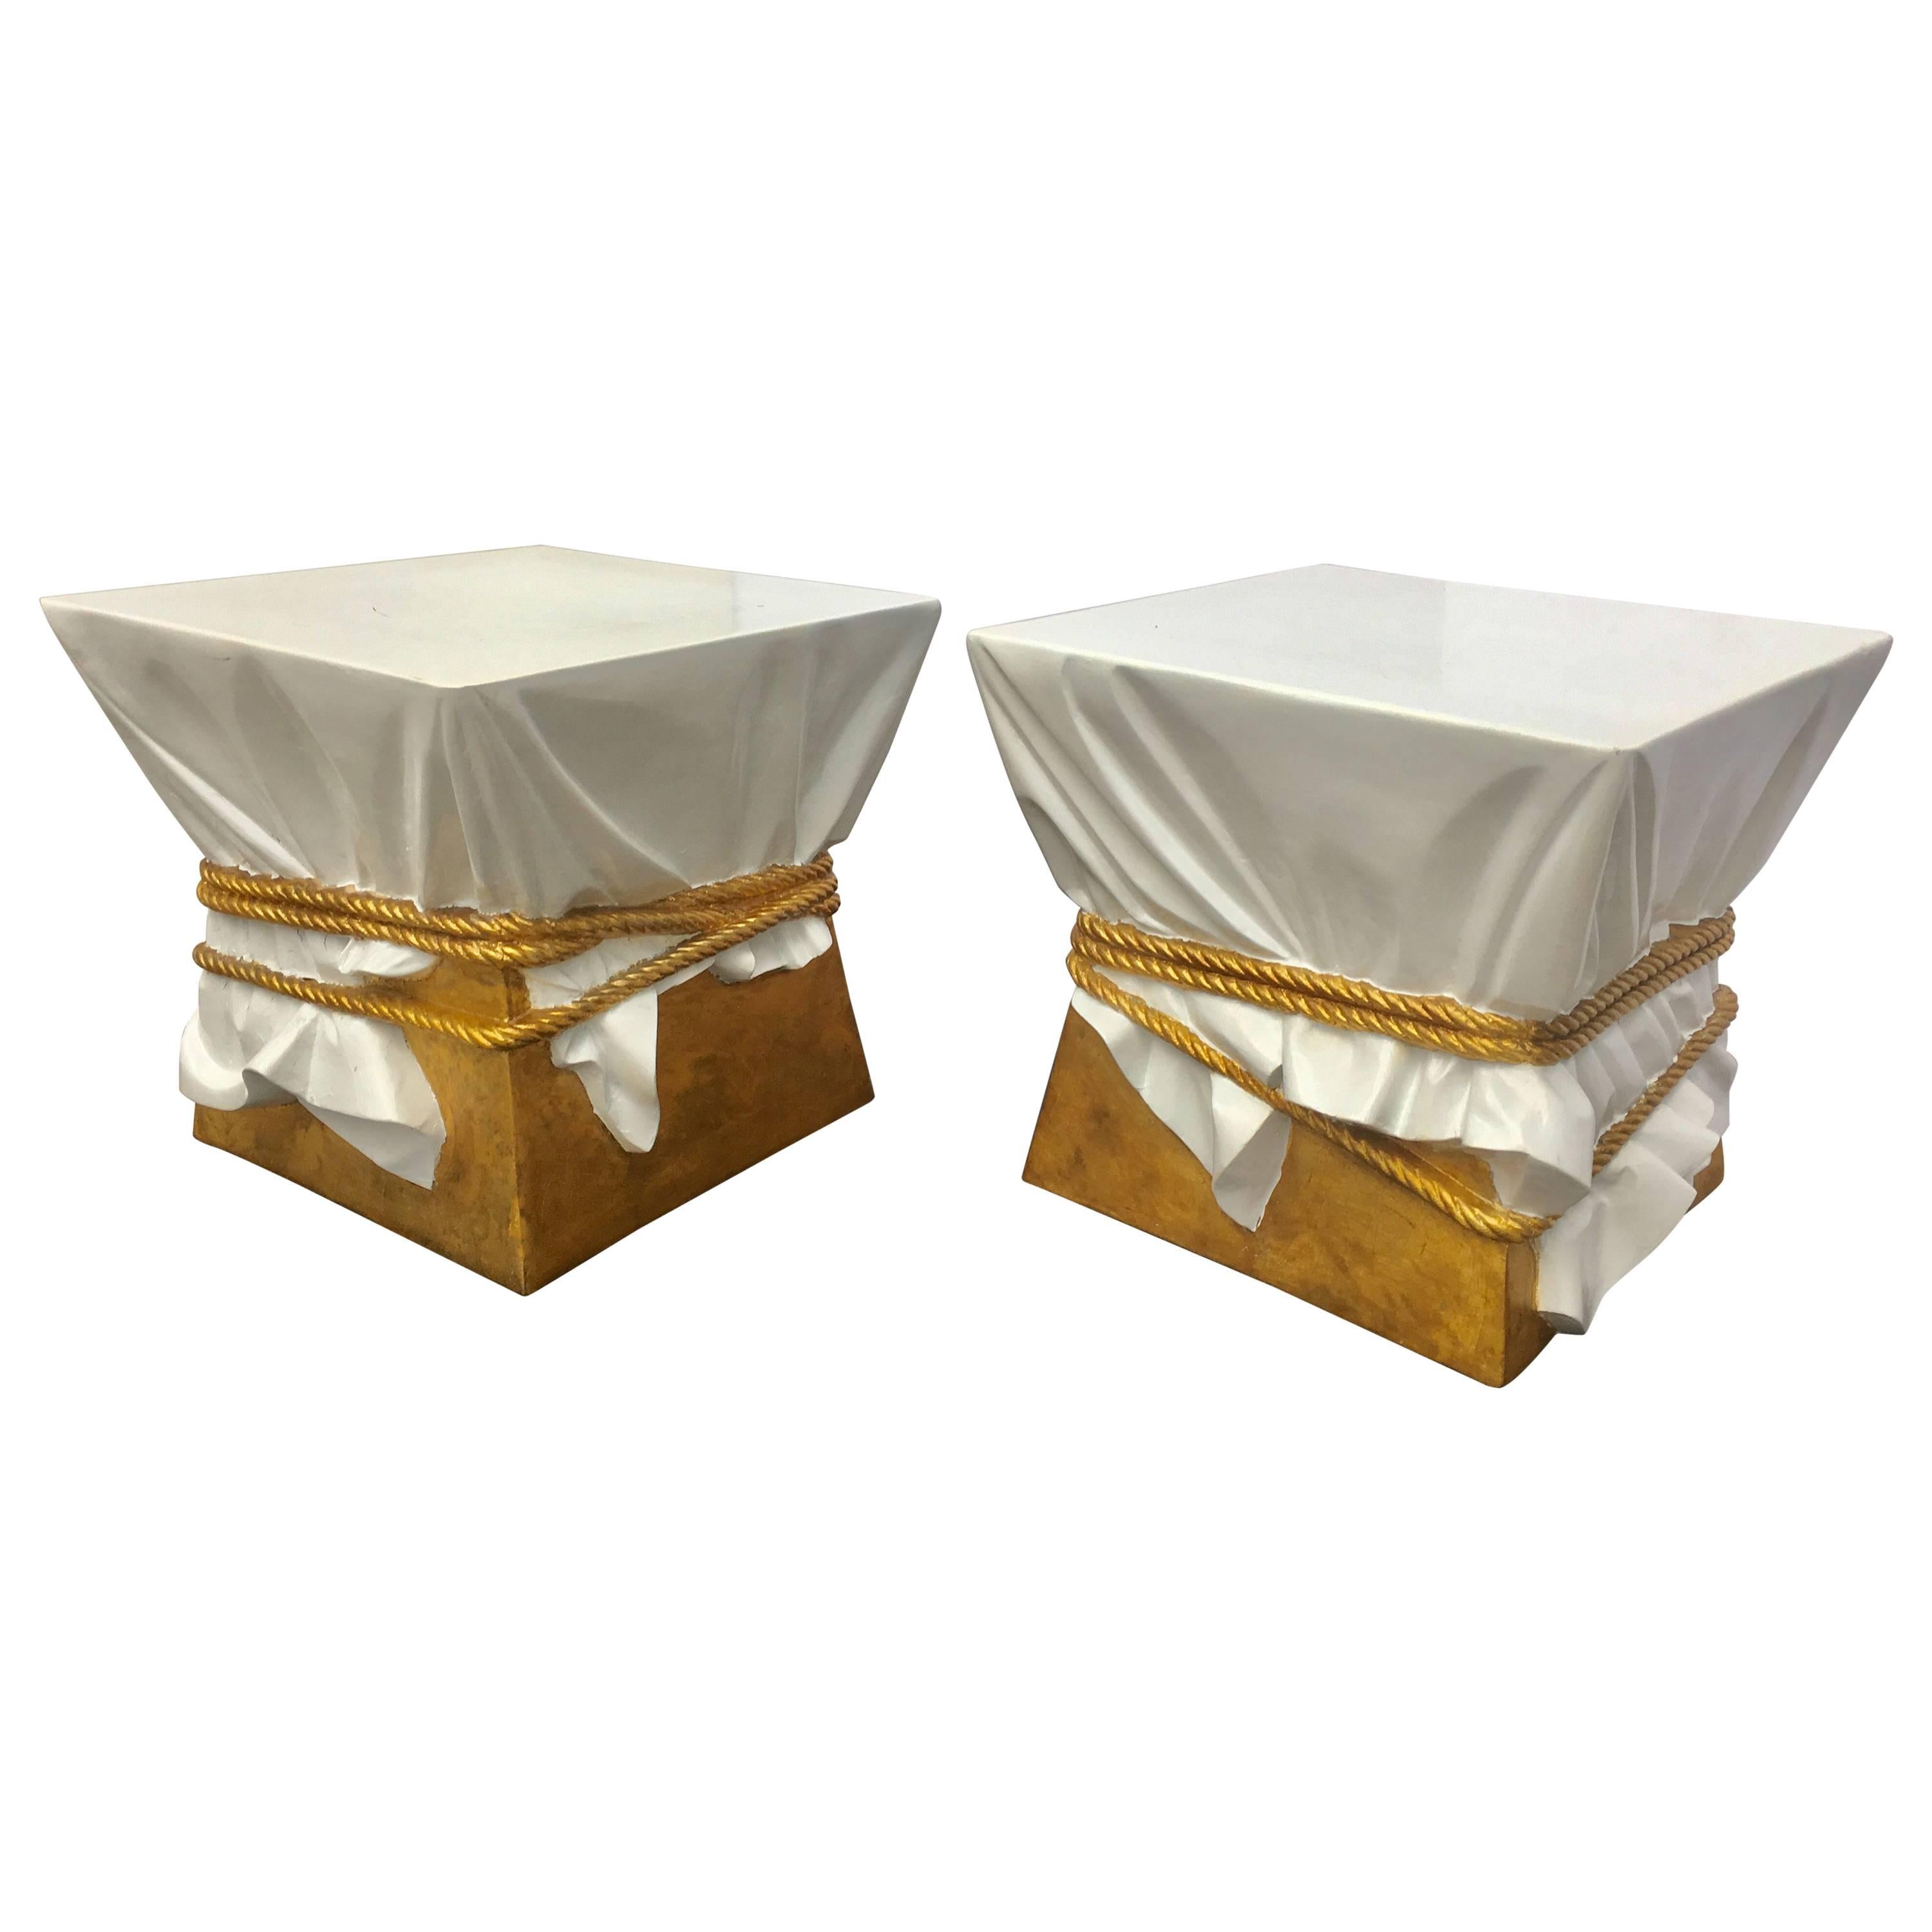 Sculptural Hollywood Regency Style Draped Rope Occasional Tables or Stools 